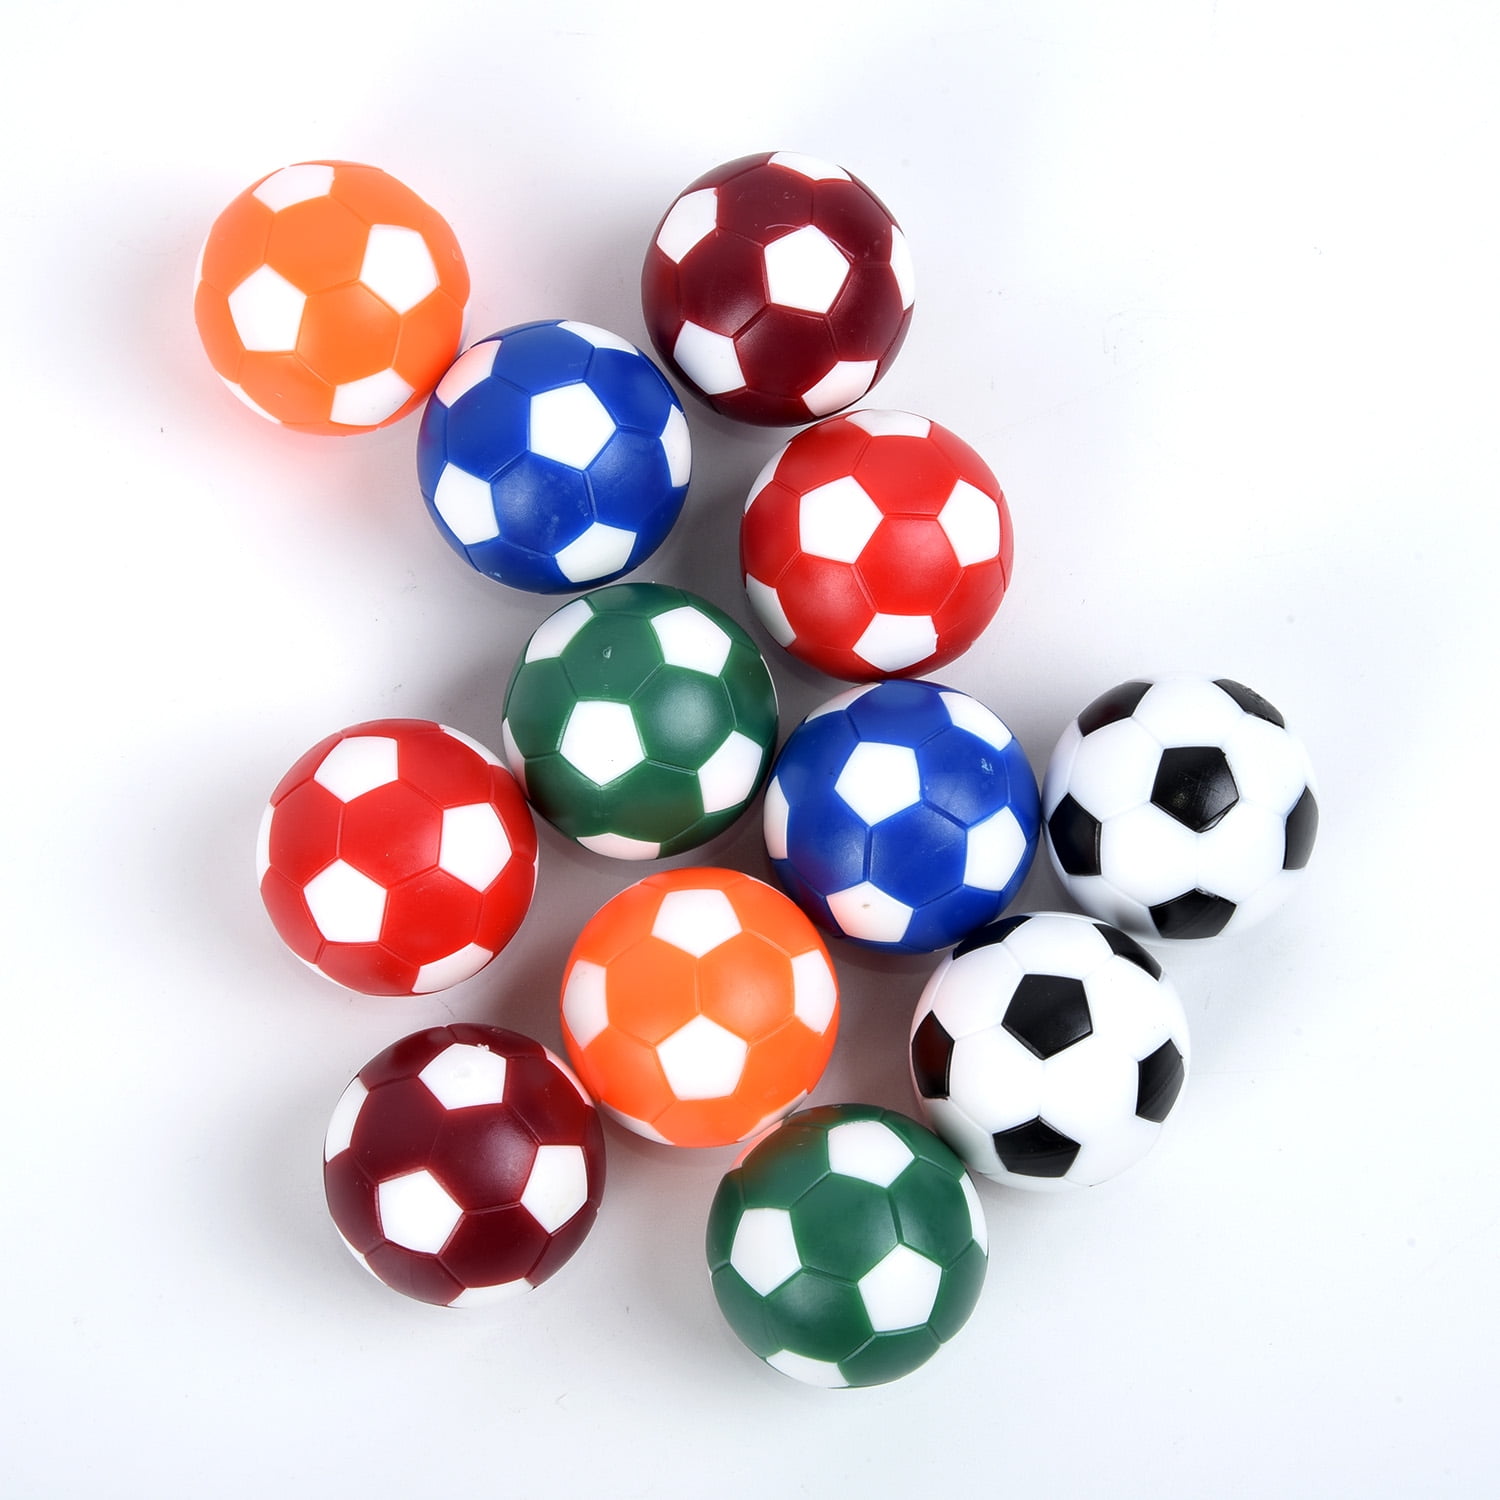 Details about   12pcs 32mm SOCCER TABLE Football FOOSBALL BALLs White 